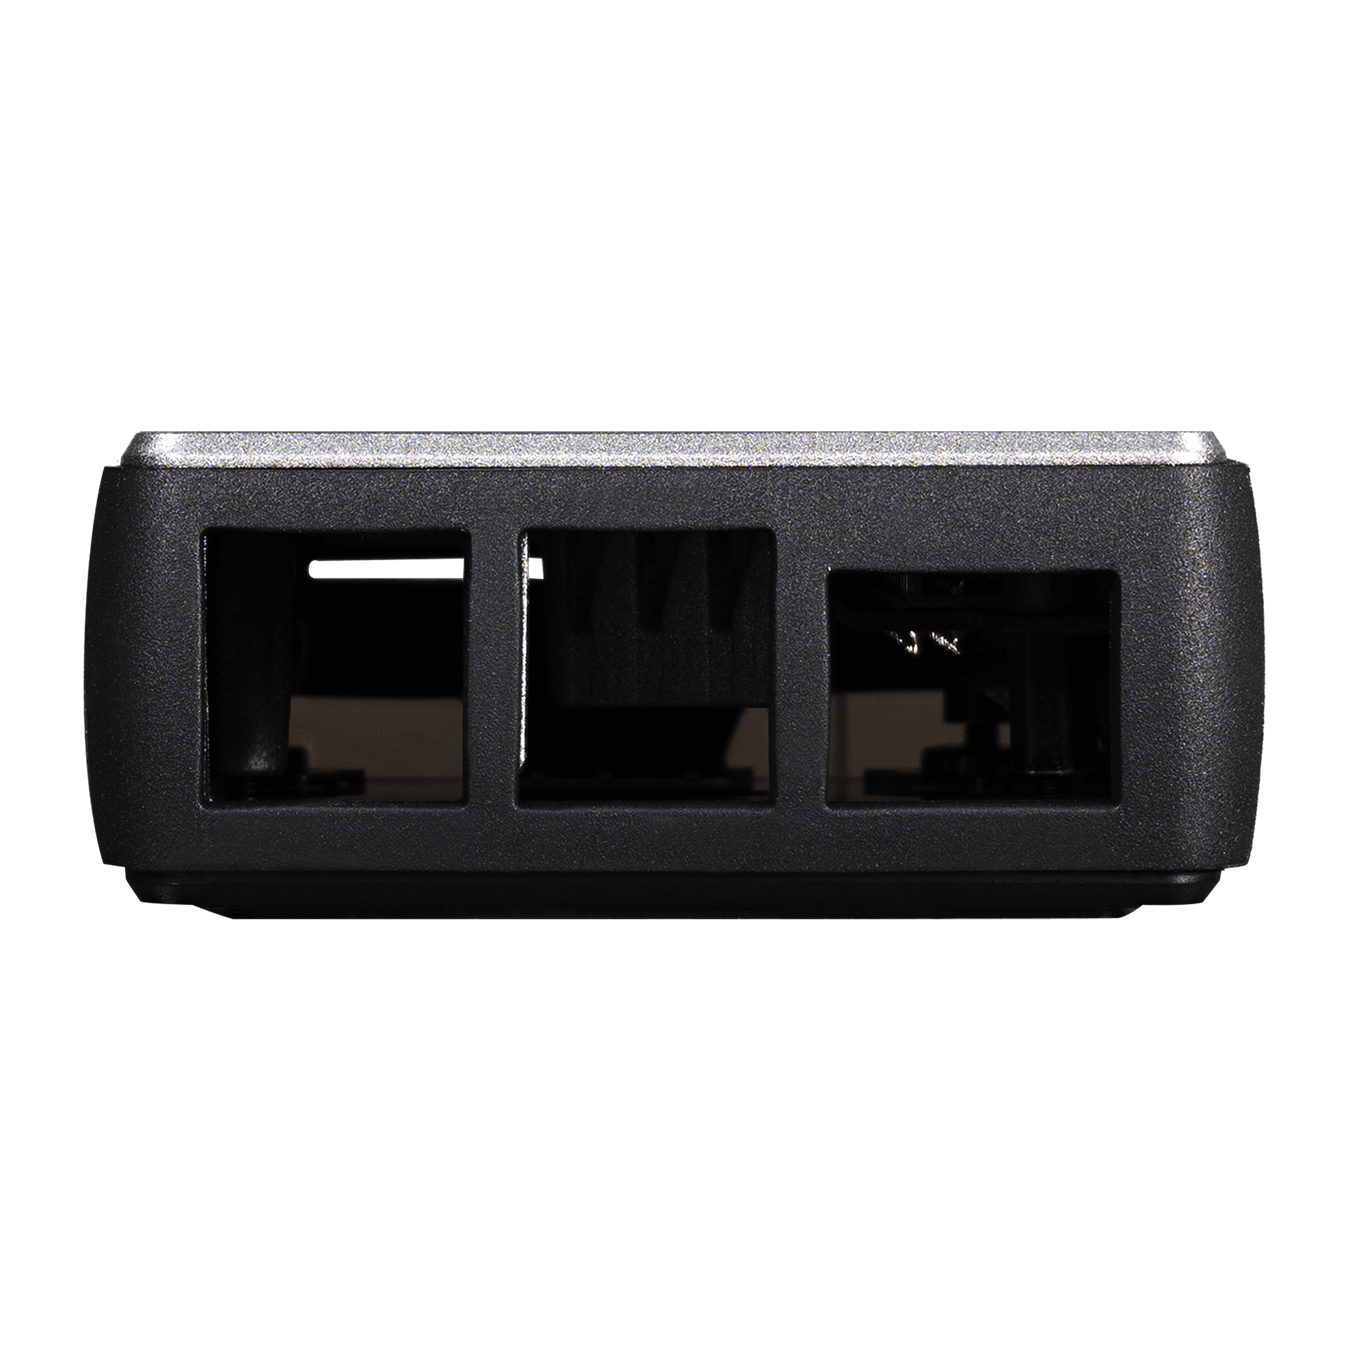 Rear view of the Pi Case 40 V2 with cutouts in the TPU bumper for USB 2.0, USB 3.0 and Ethernet connection.